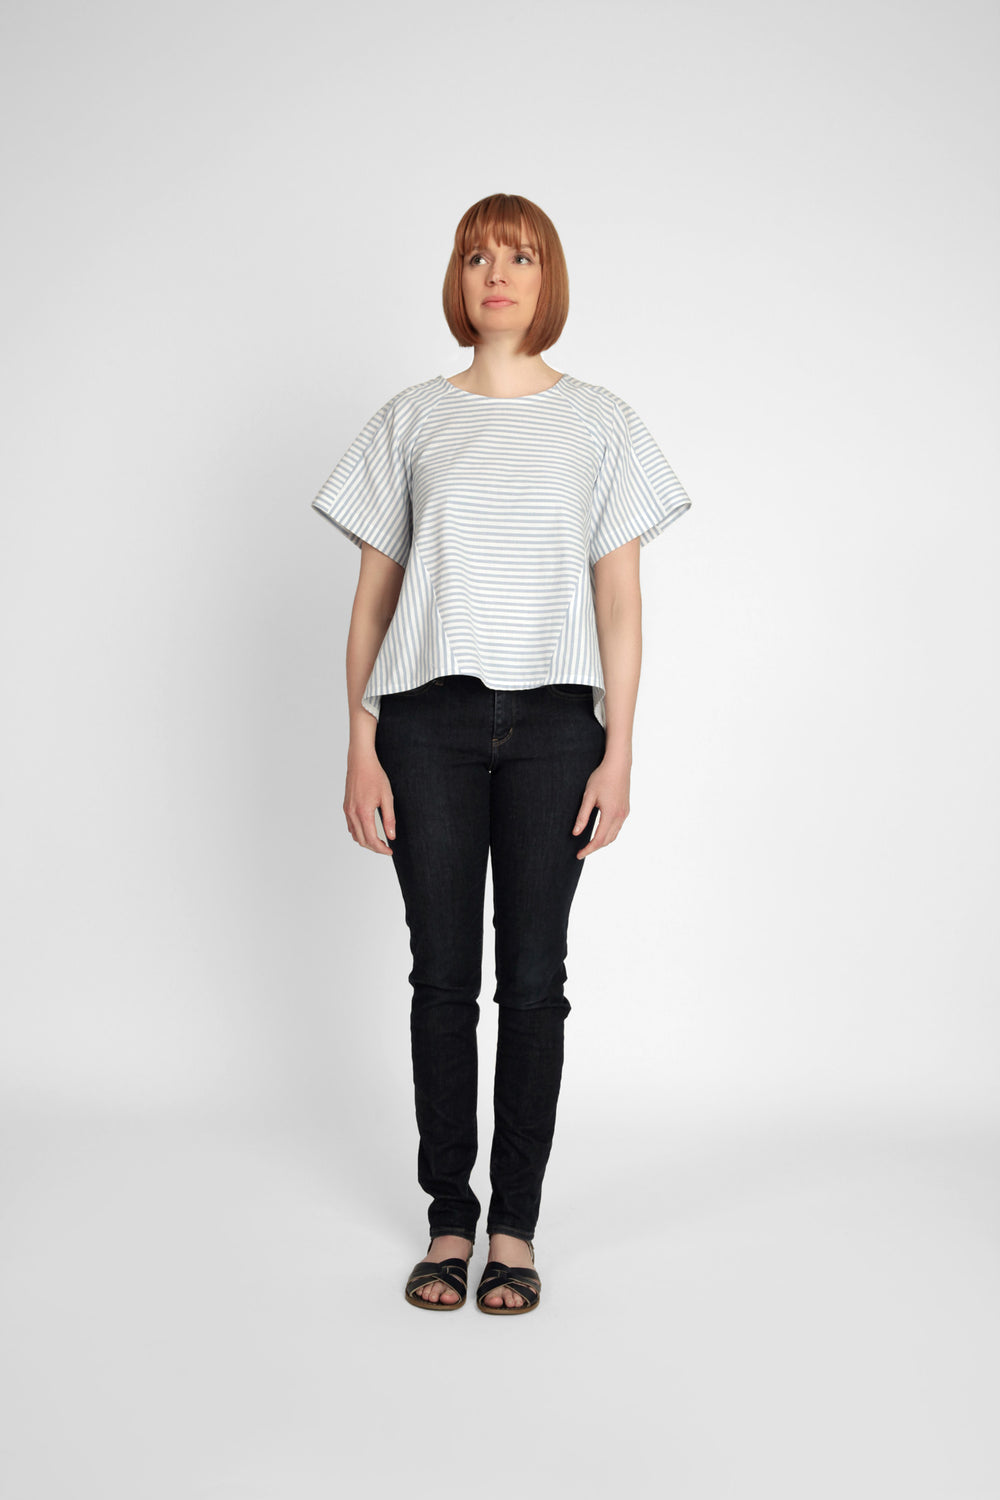 Woman wearing the Collins Top pattern from In the Folds on The Fold Line. A top pattern made in linen, linen blends, cotton, gauze, chambray, sateen, crepe de chine or viscose fabrics, featuring a loose-fitting trapeze-shape, round neck, high-low hem, cen